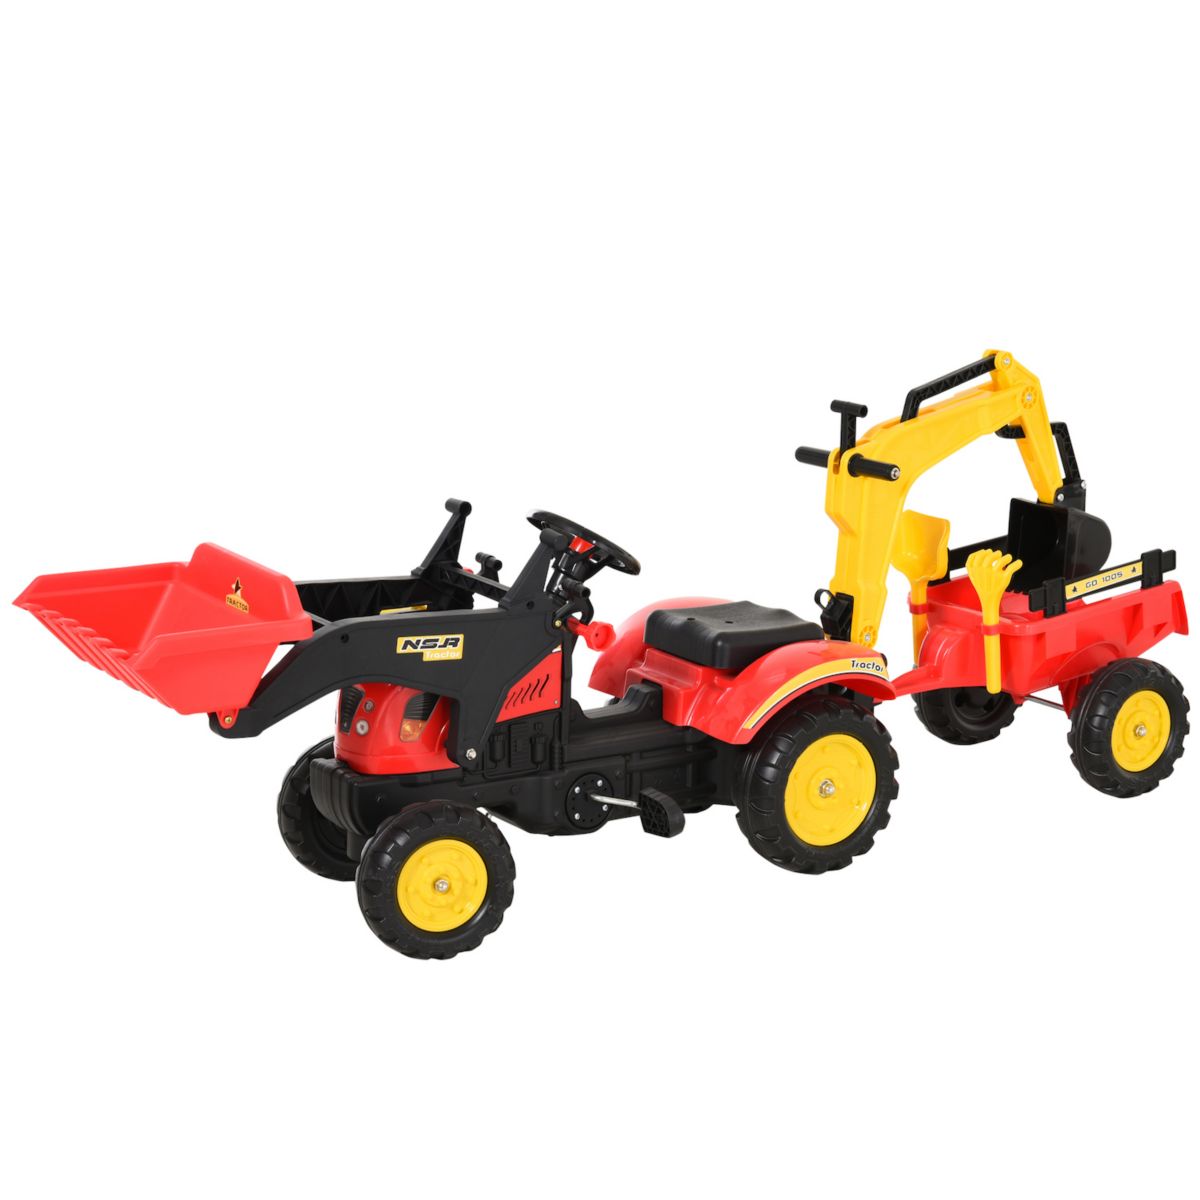 Aosom 3 in1 Kids Ride On Bulldozer/Excavator Toy with 6 Wheels Controllable Cargo Trailer and Easy Pedal Controls Aosom